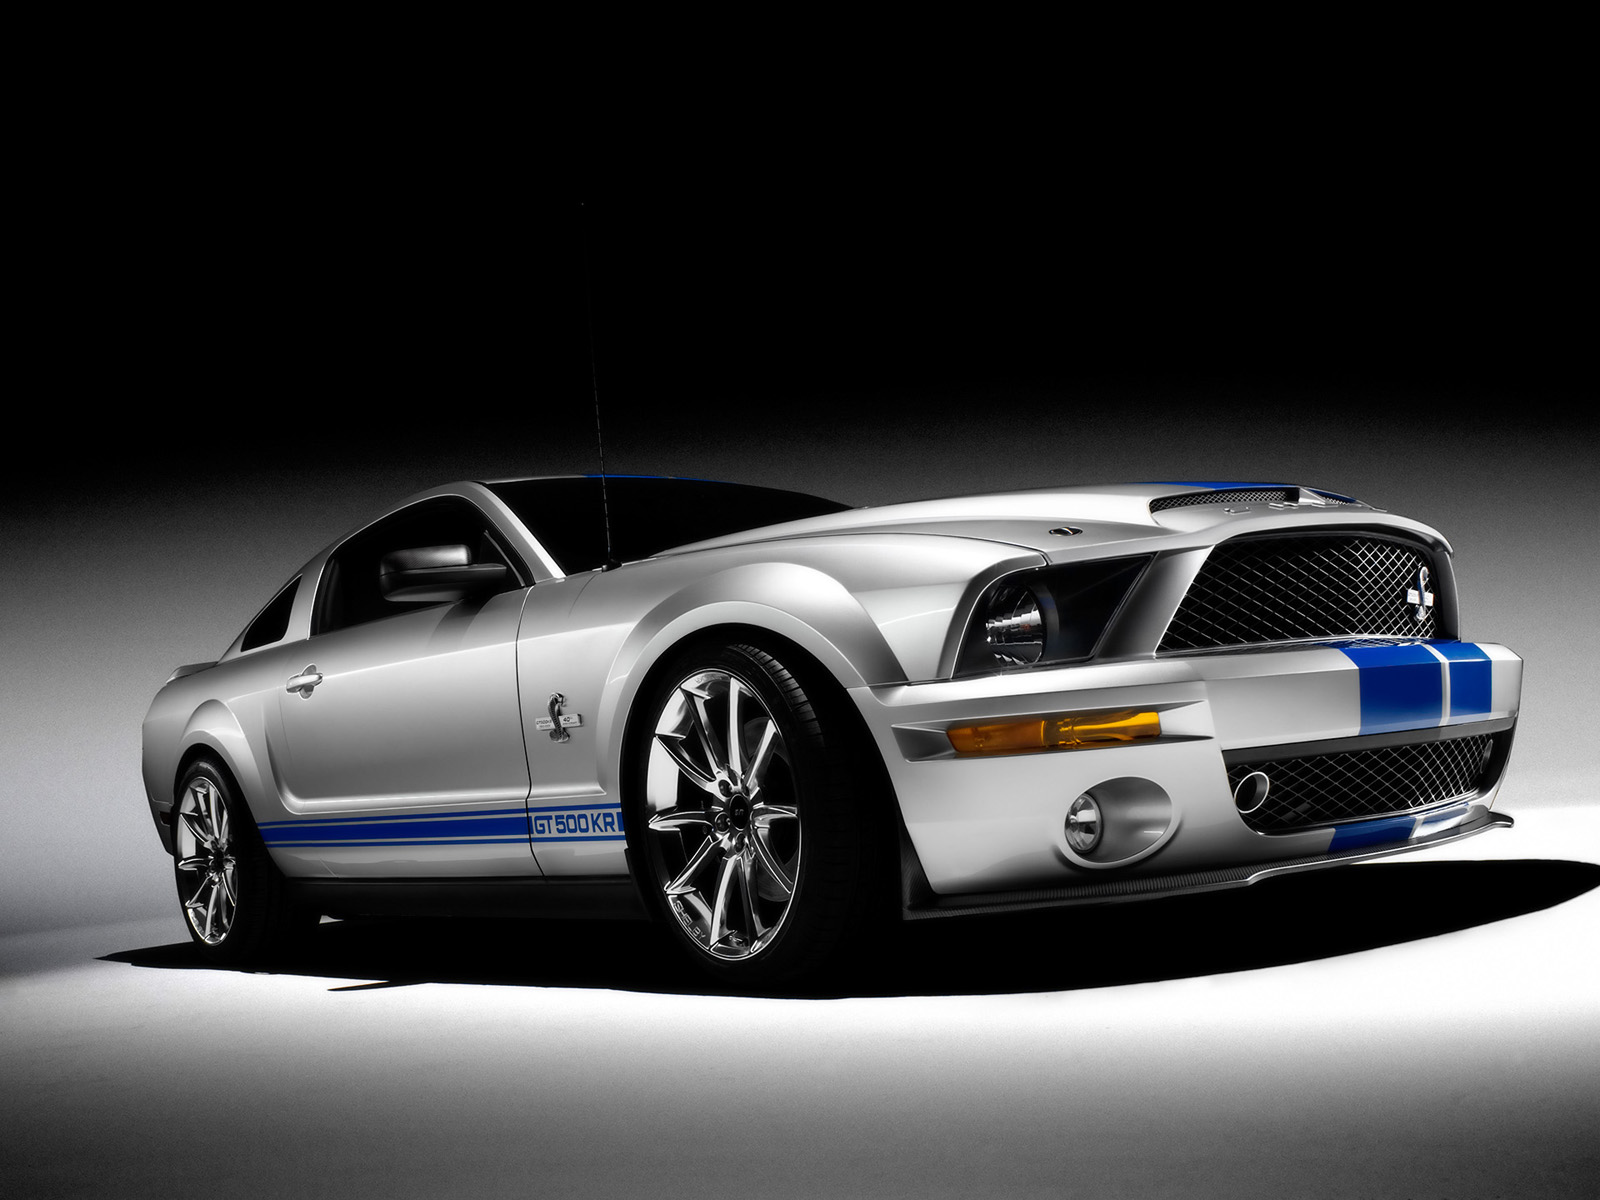 Ford Mustang (2)